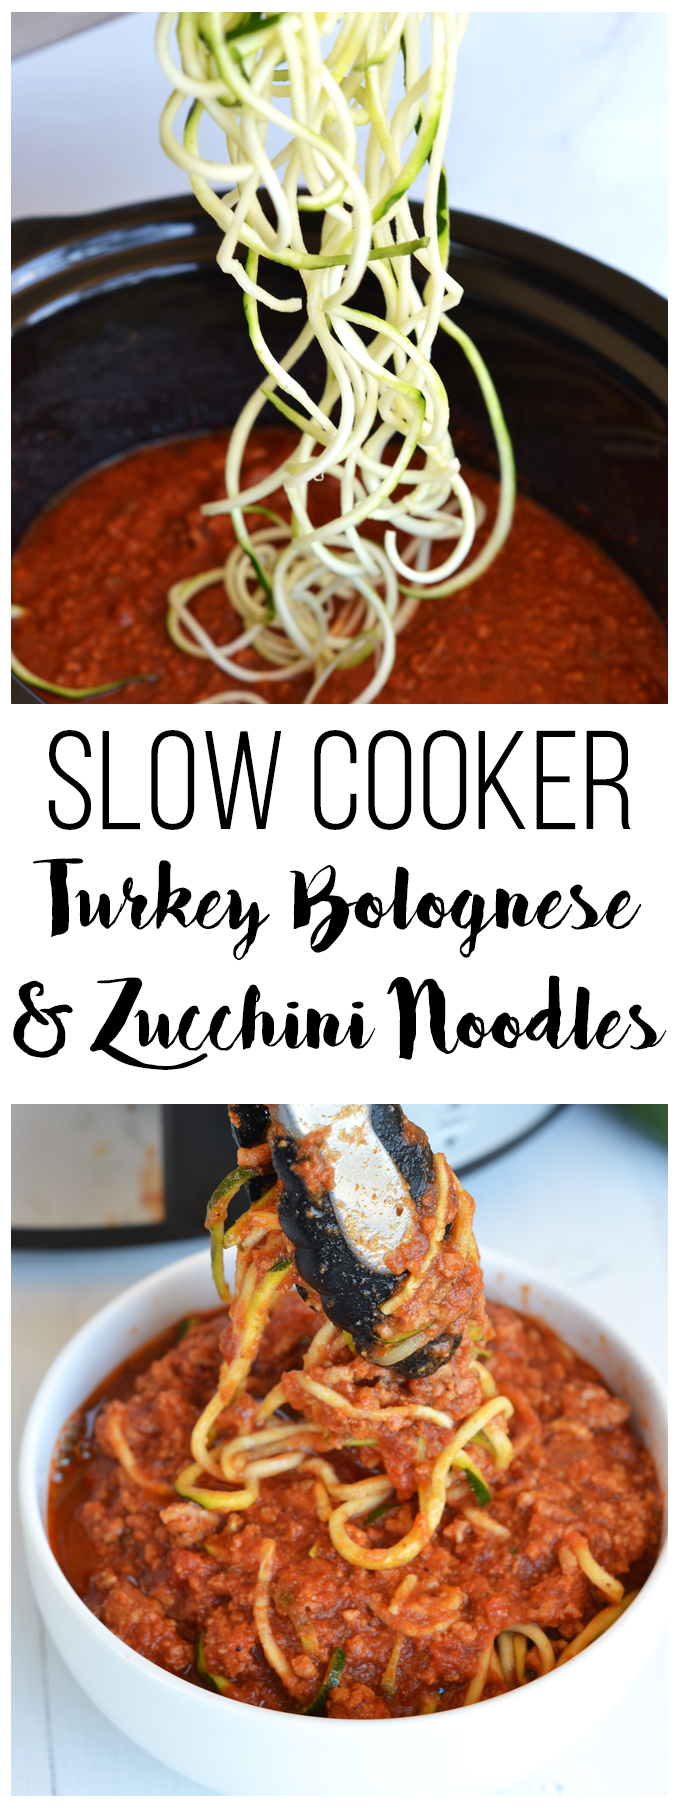 This Slow Cooker Turkey Bolognese and Zucchini Noodles are the perfect quick, easy and healthy weeknight meal! Just a few ingredients and it is Paleo & Whole30 compliant!